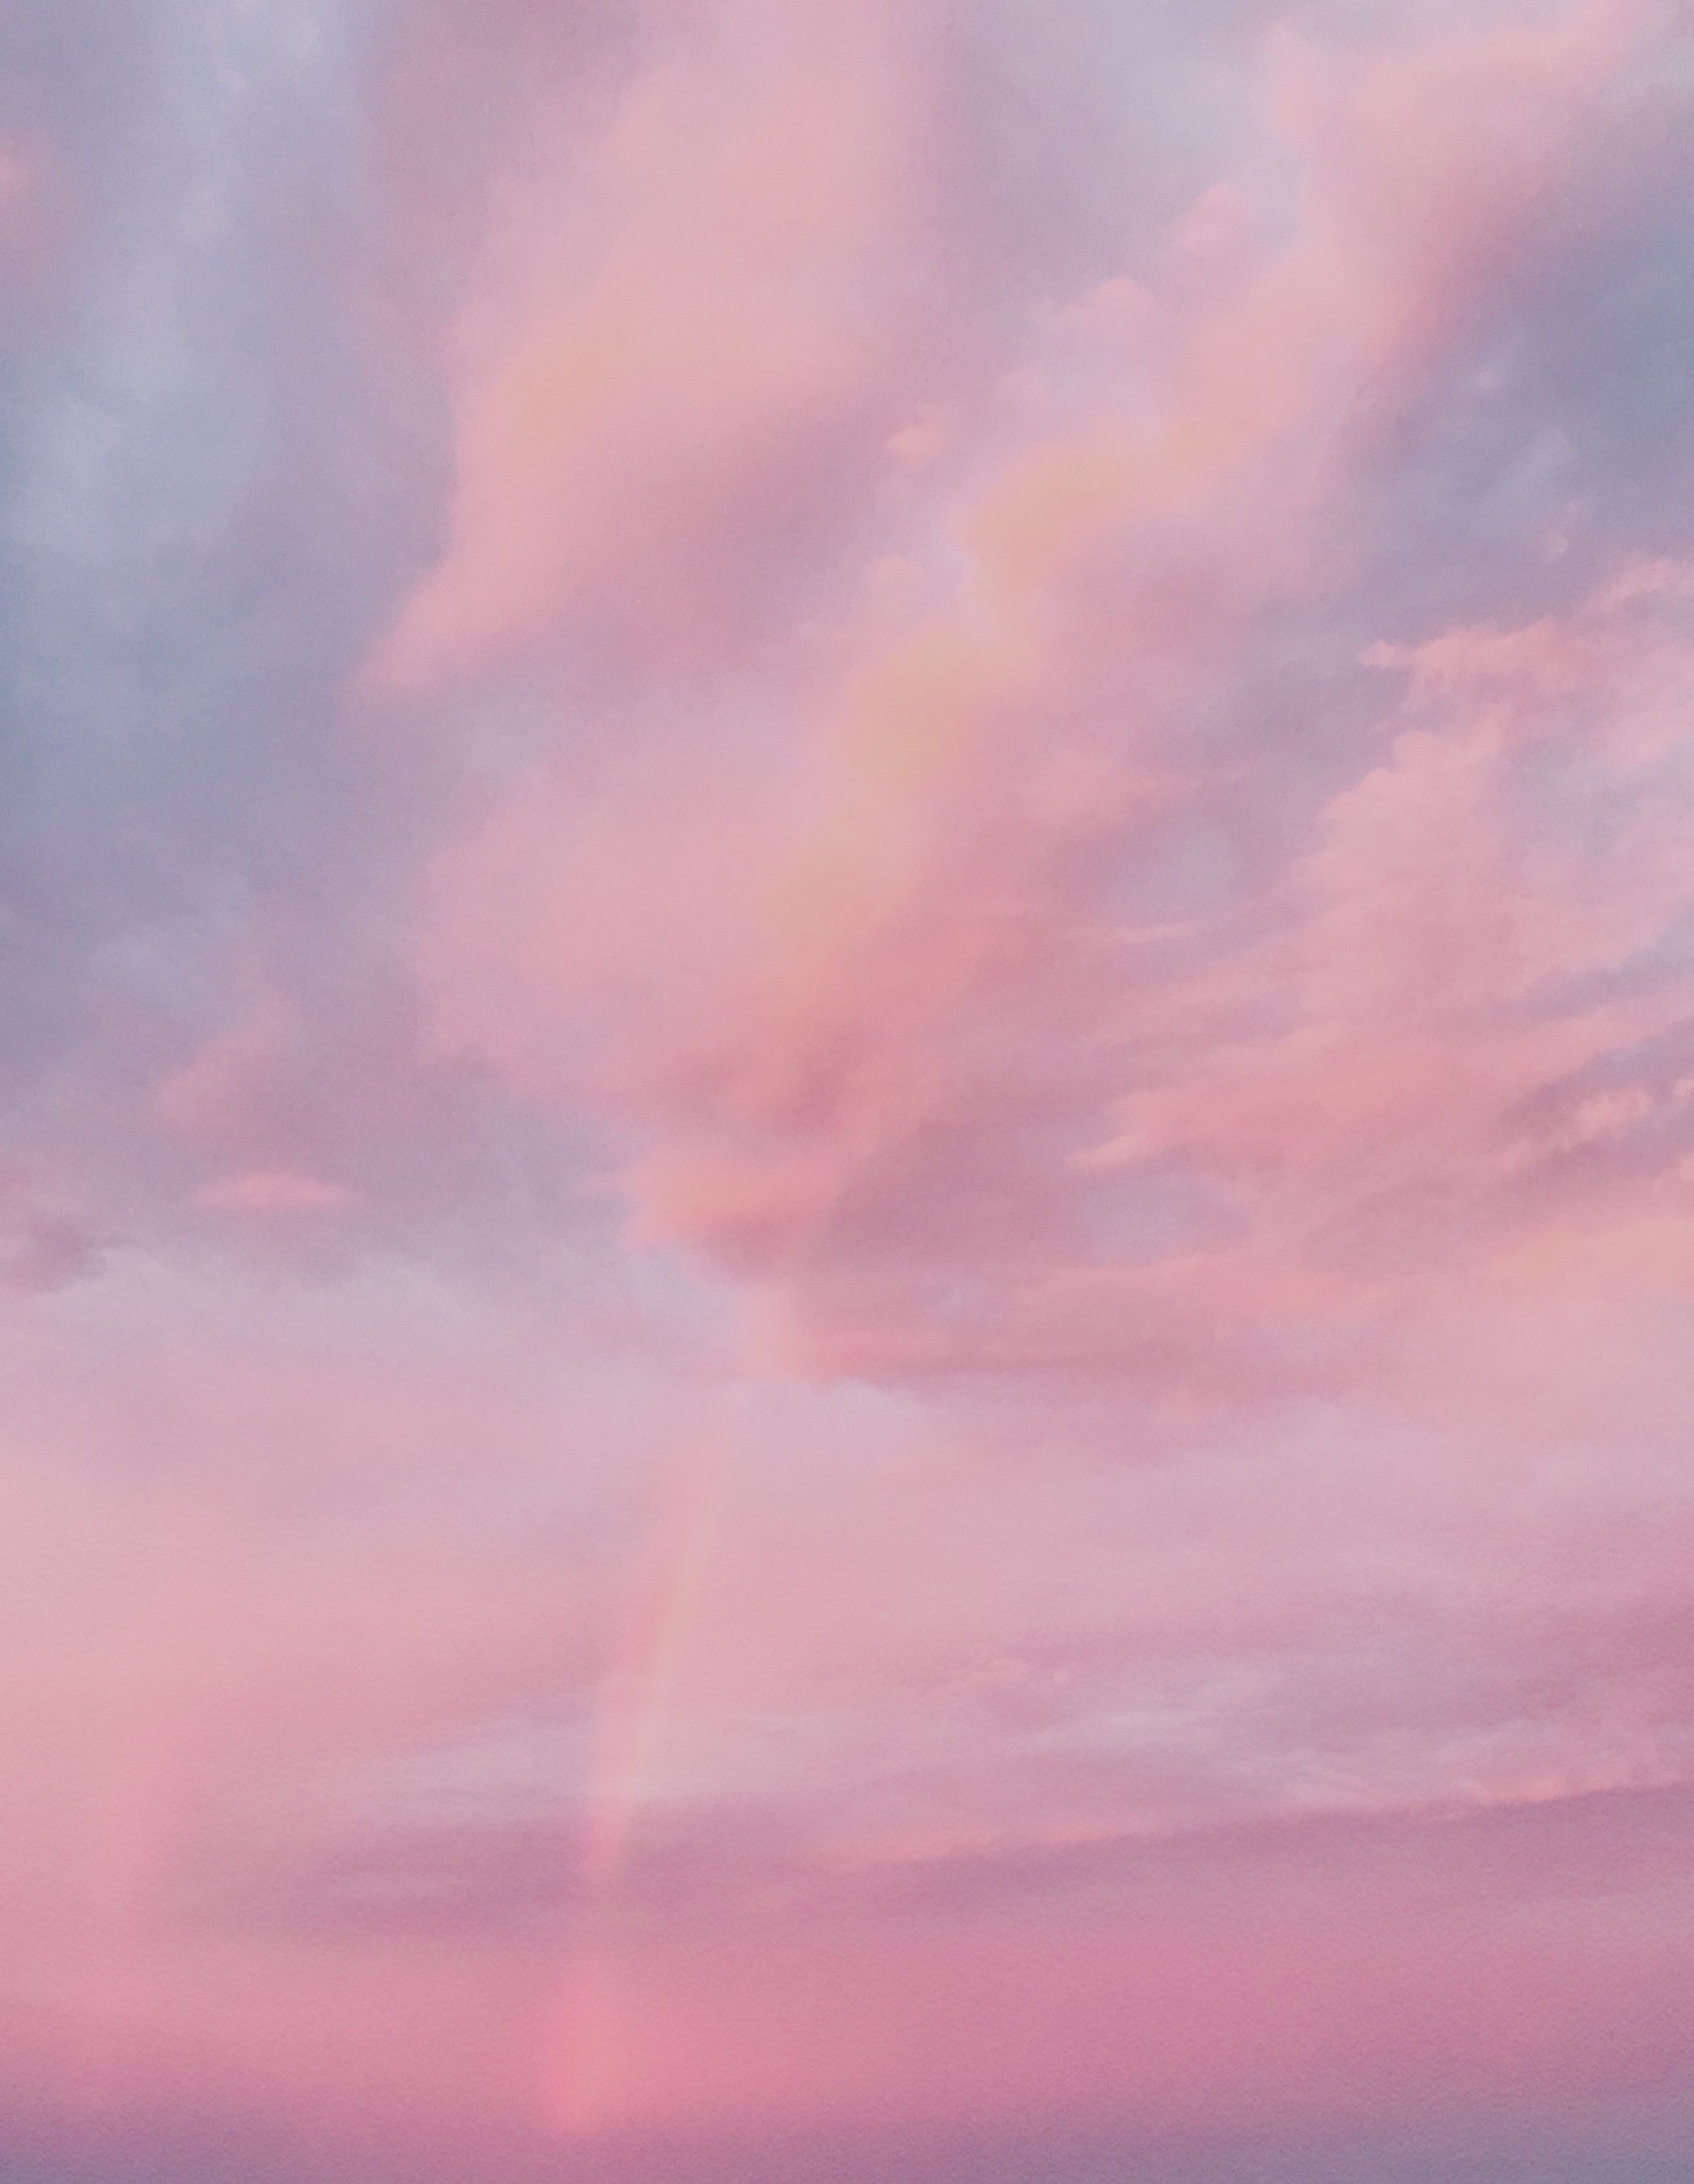 Aesthetic Pink Sky Wallpaper Free Aesthetic Pink Sky Background